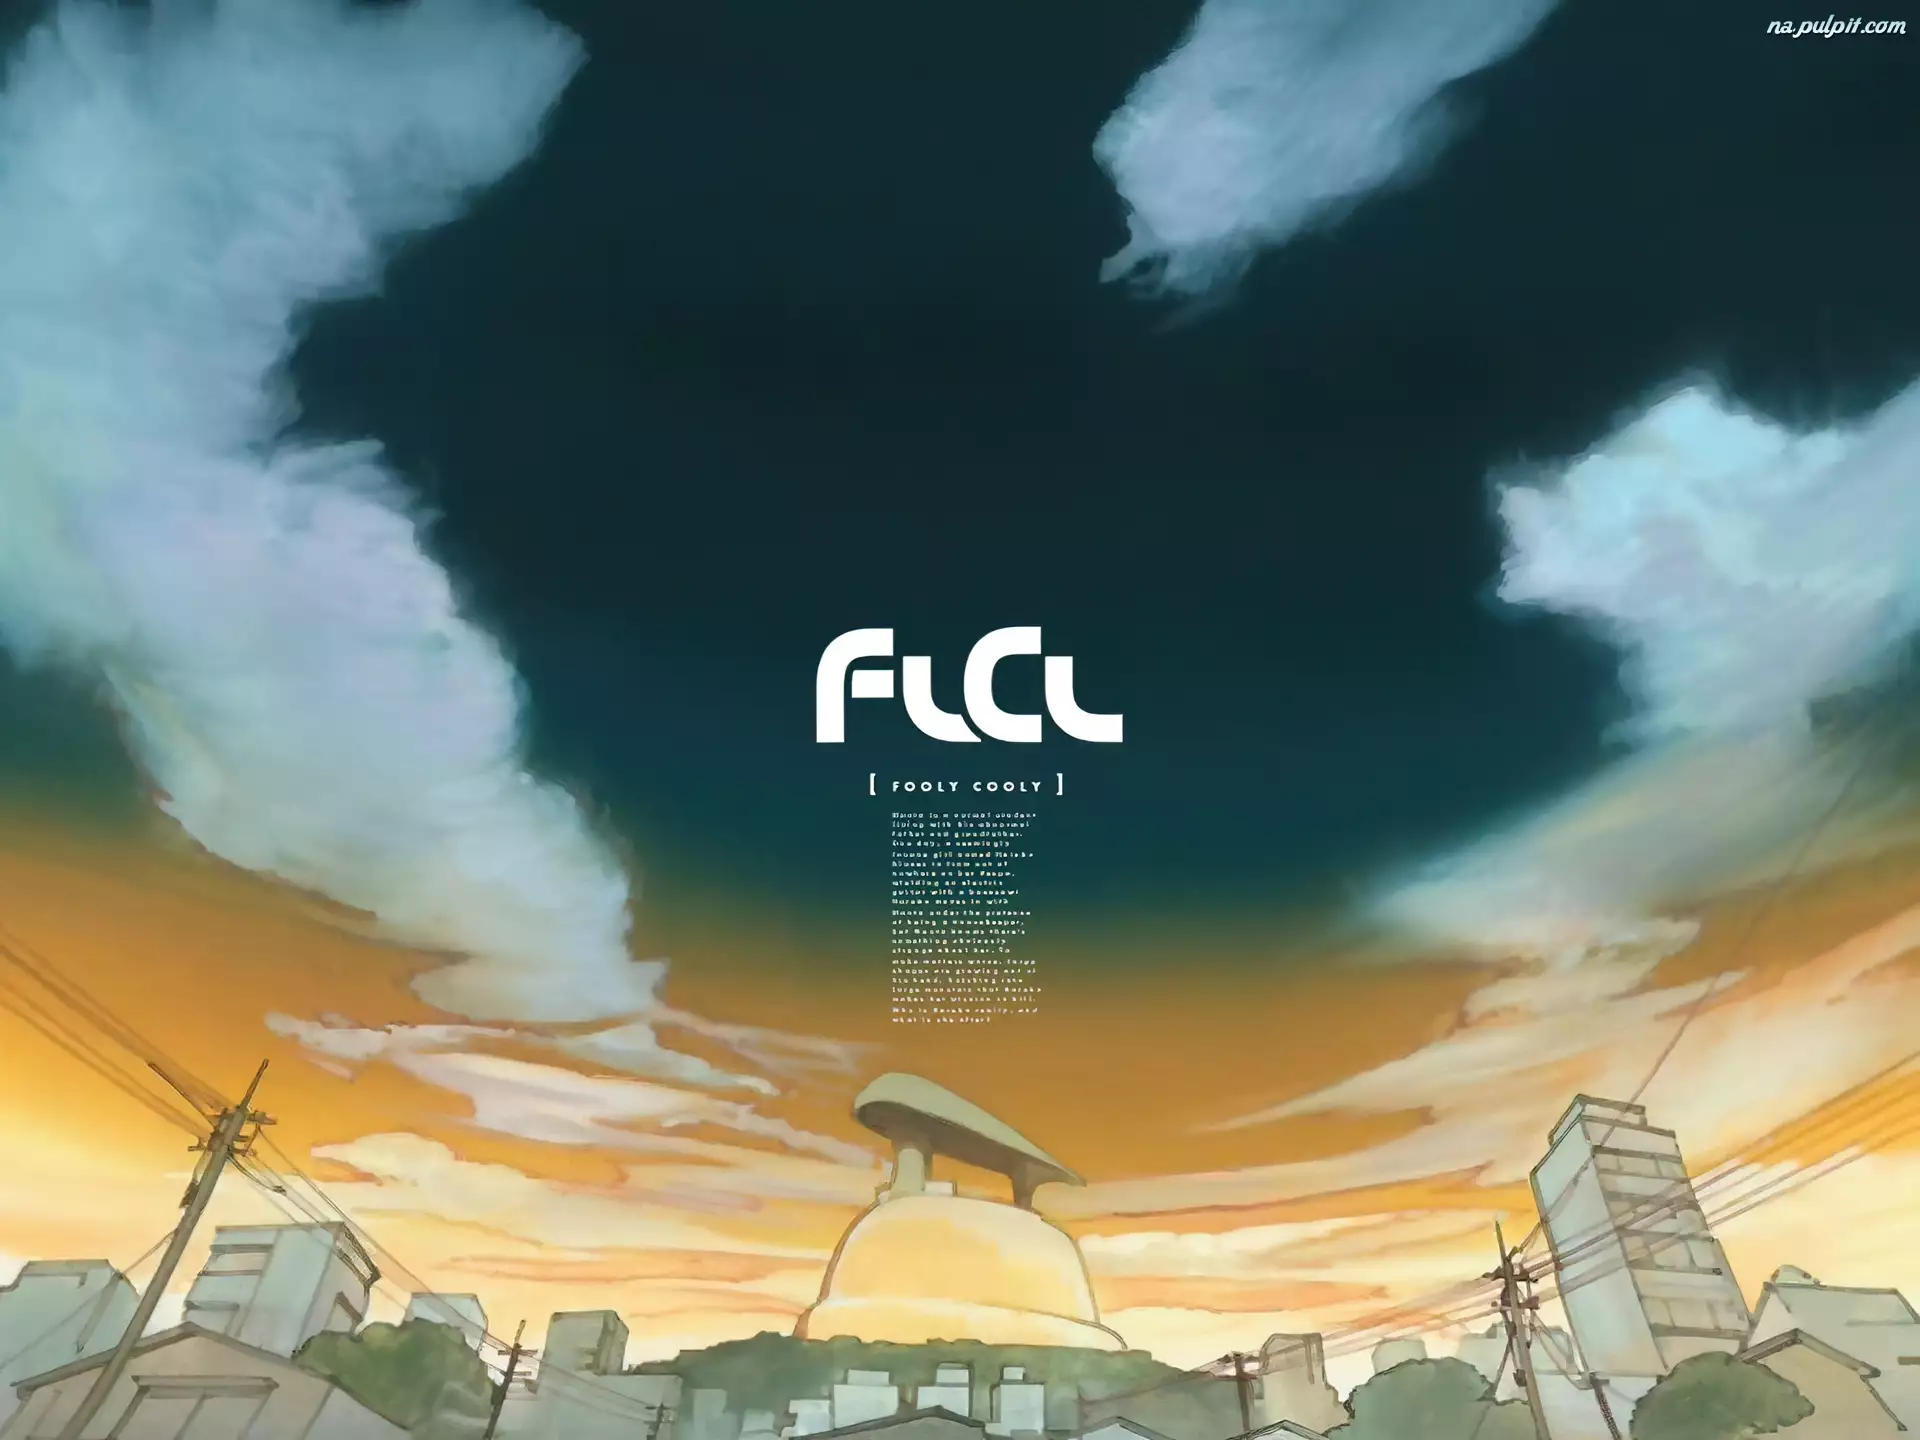 miasto, Fully Coolly, flcl